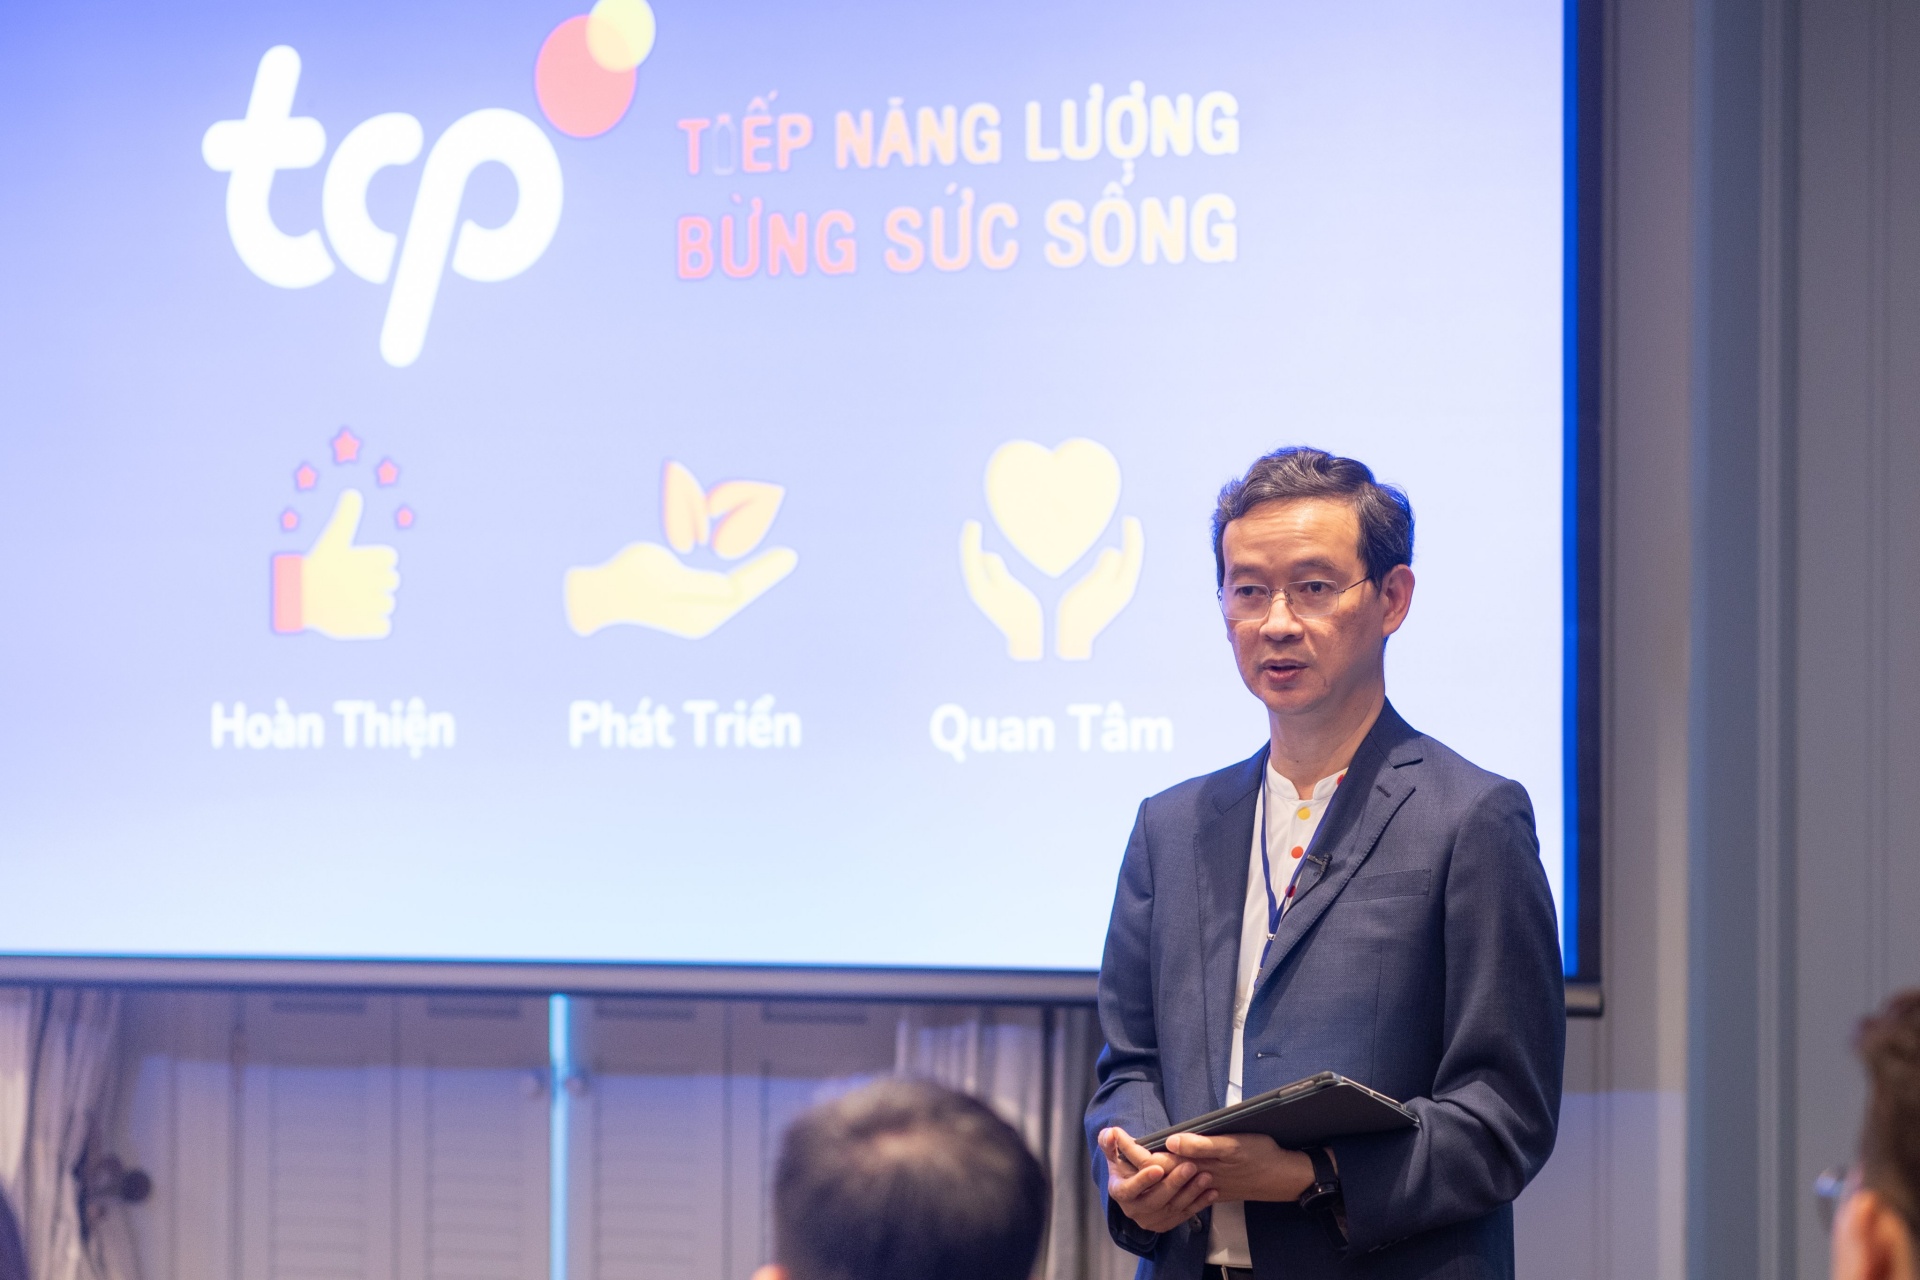 TCP Group's CEO announced a new corporate plan